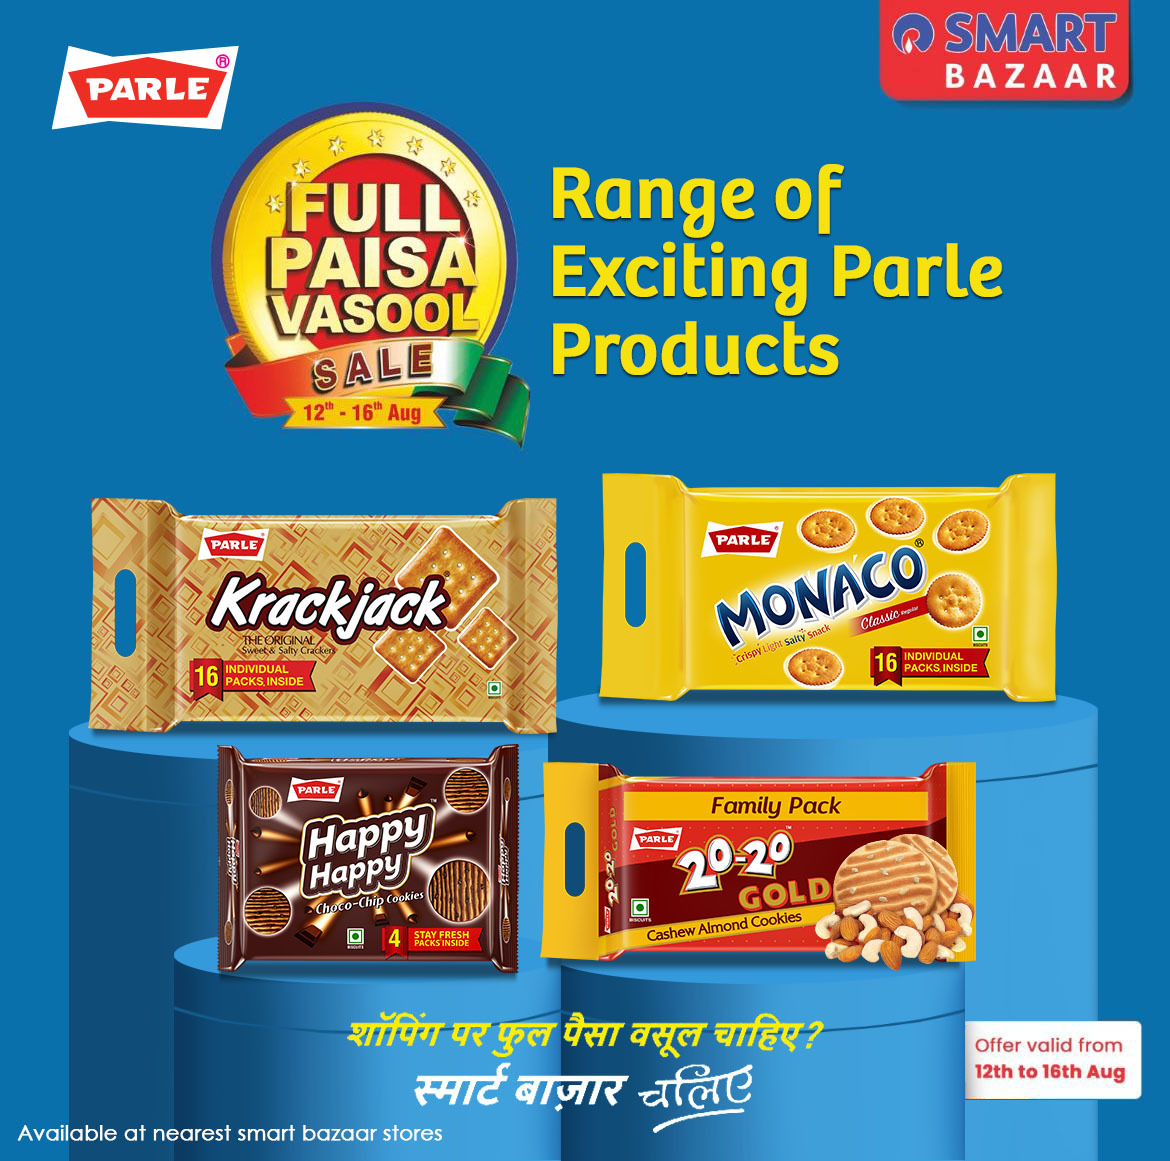 Get in the festive mode with offers on your favourite biscuit brands from the house of Parle! Visit your nearest @SMARTBazaarIn stores to grab the deals!